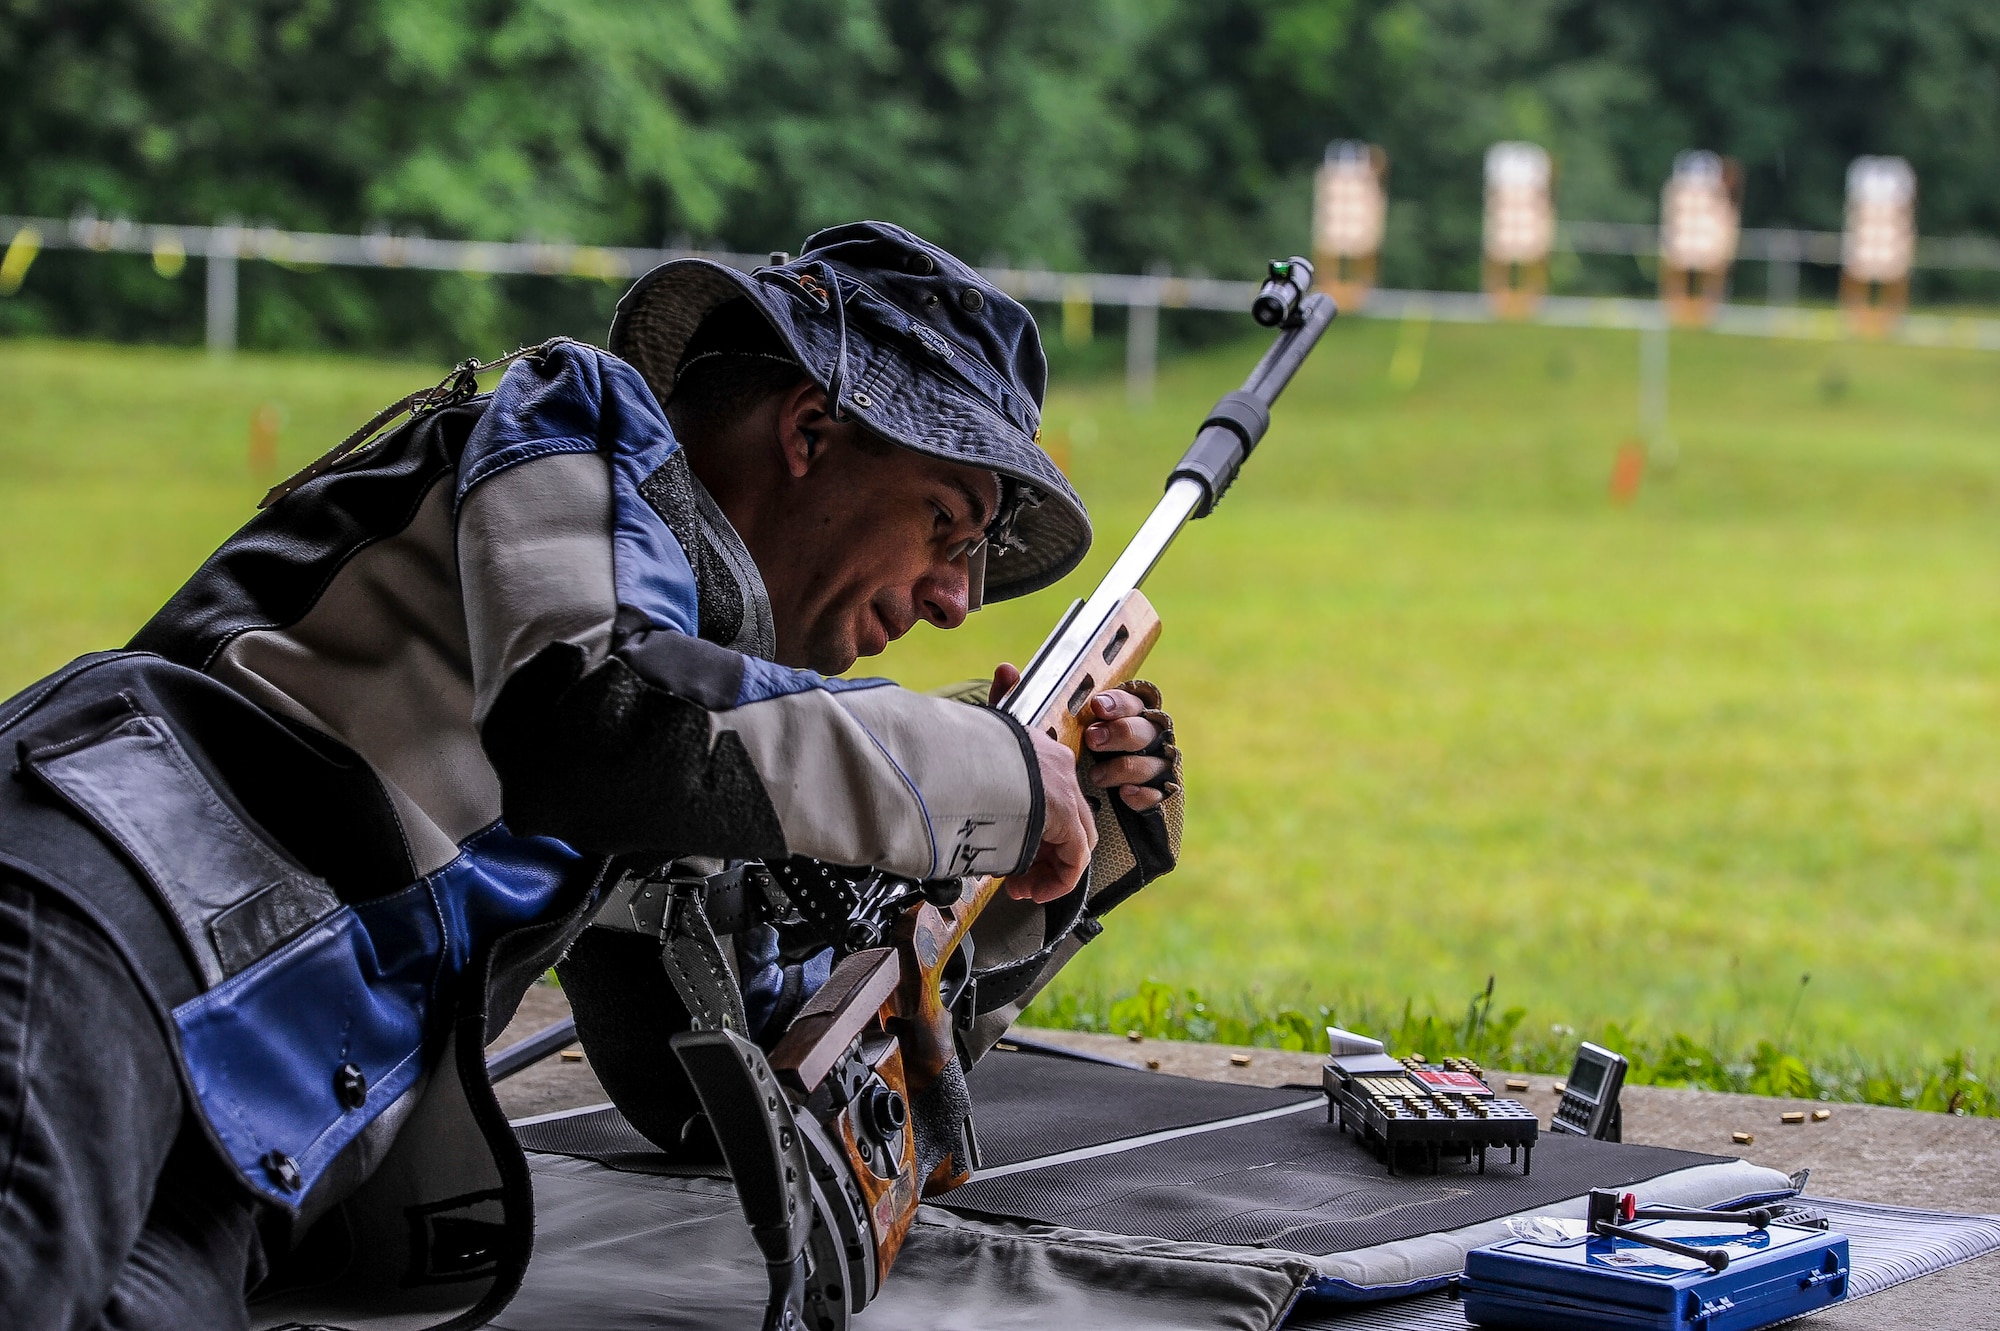 Lt. Col. Mark Gould gets into position to shoot his target during the Dave Cramer Memorial Smallbore Regional Prone Metric NRA Regional Tournament in New Freedom, Pa., June 27, 2015. Gould, a foreign liaison officer for the Defense Intelligence Agency’s Office of Partner Engagement at the Pentagon, finished second in his class and fourth overall at the tournament. Gould has been involved in competitive shooting for the past 23 years and has been a member of the Air Force International Rifle Team for 17 years. (U.S. Air Force photo/Staff Sgt. Christopher Gross)